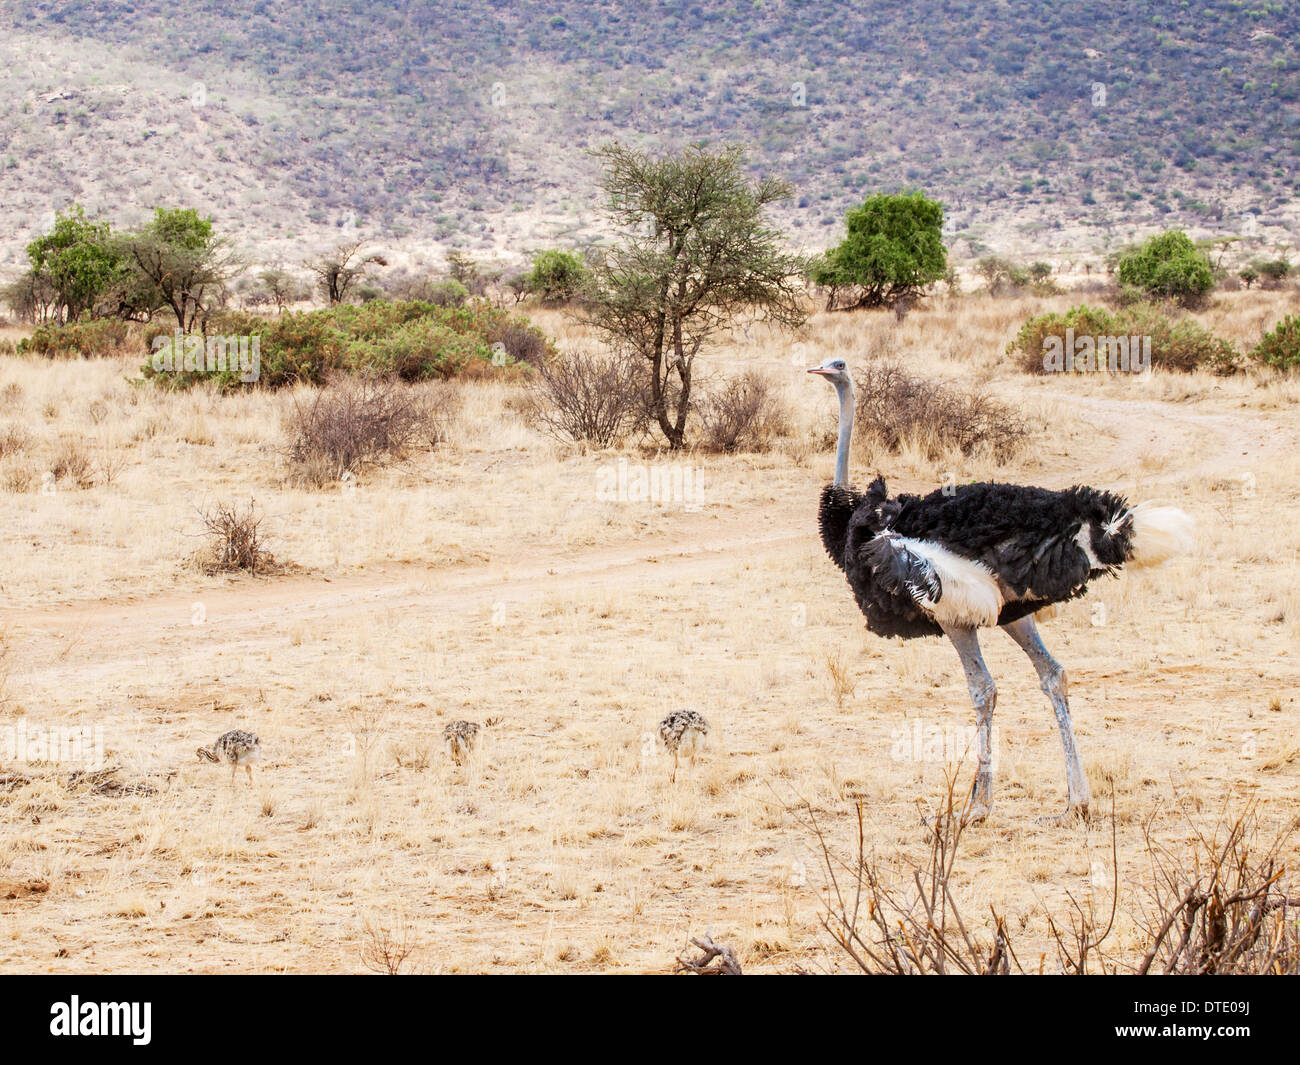 Ostrich or Common Ostrich (Struthio camelus) Stock Photo